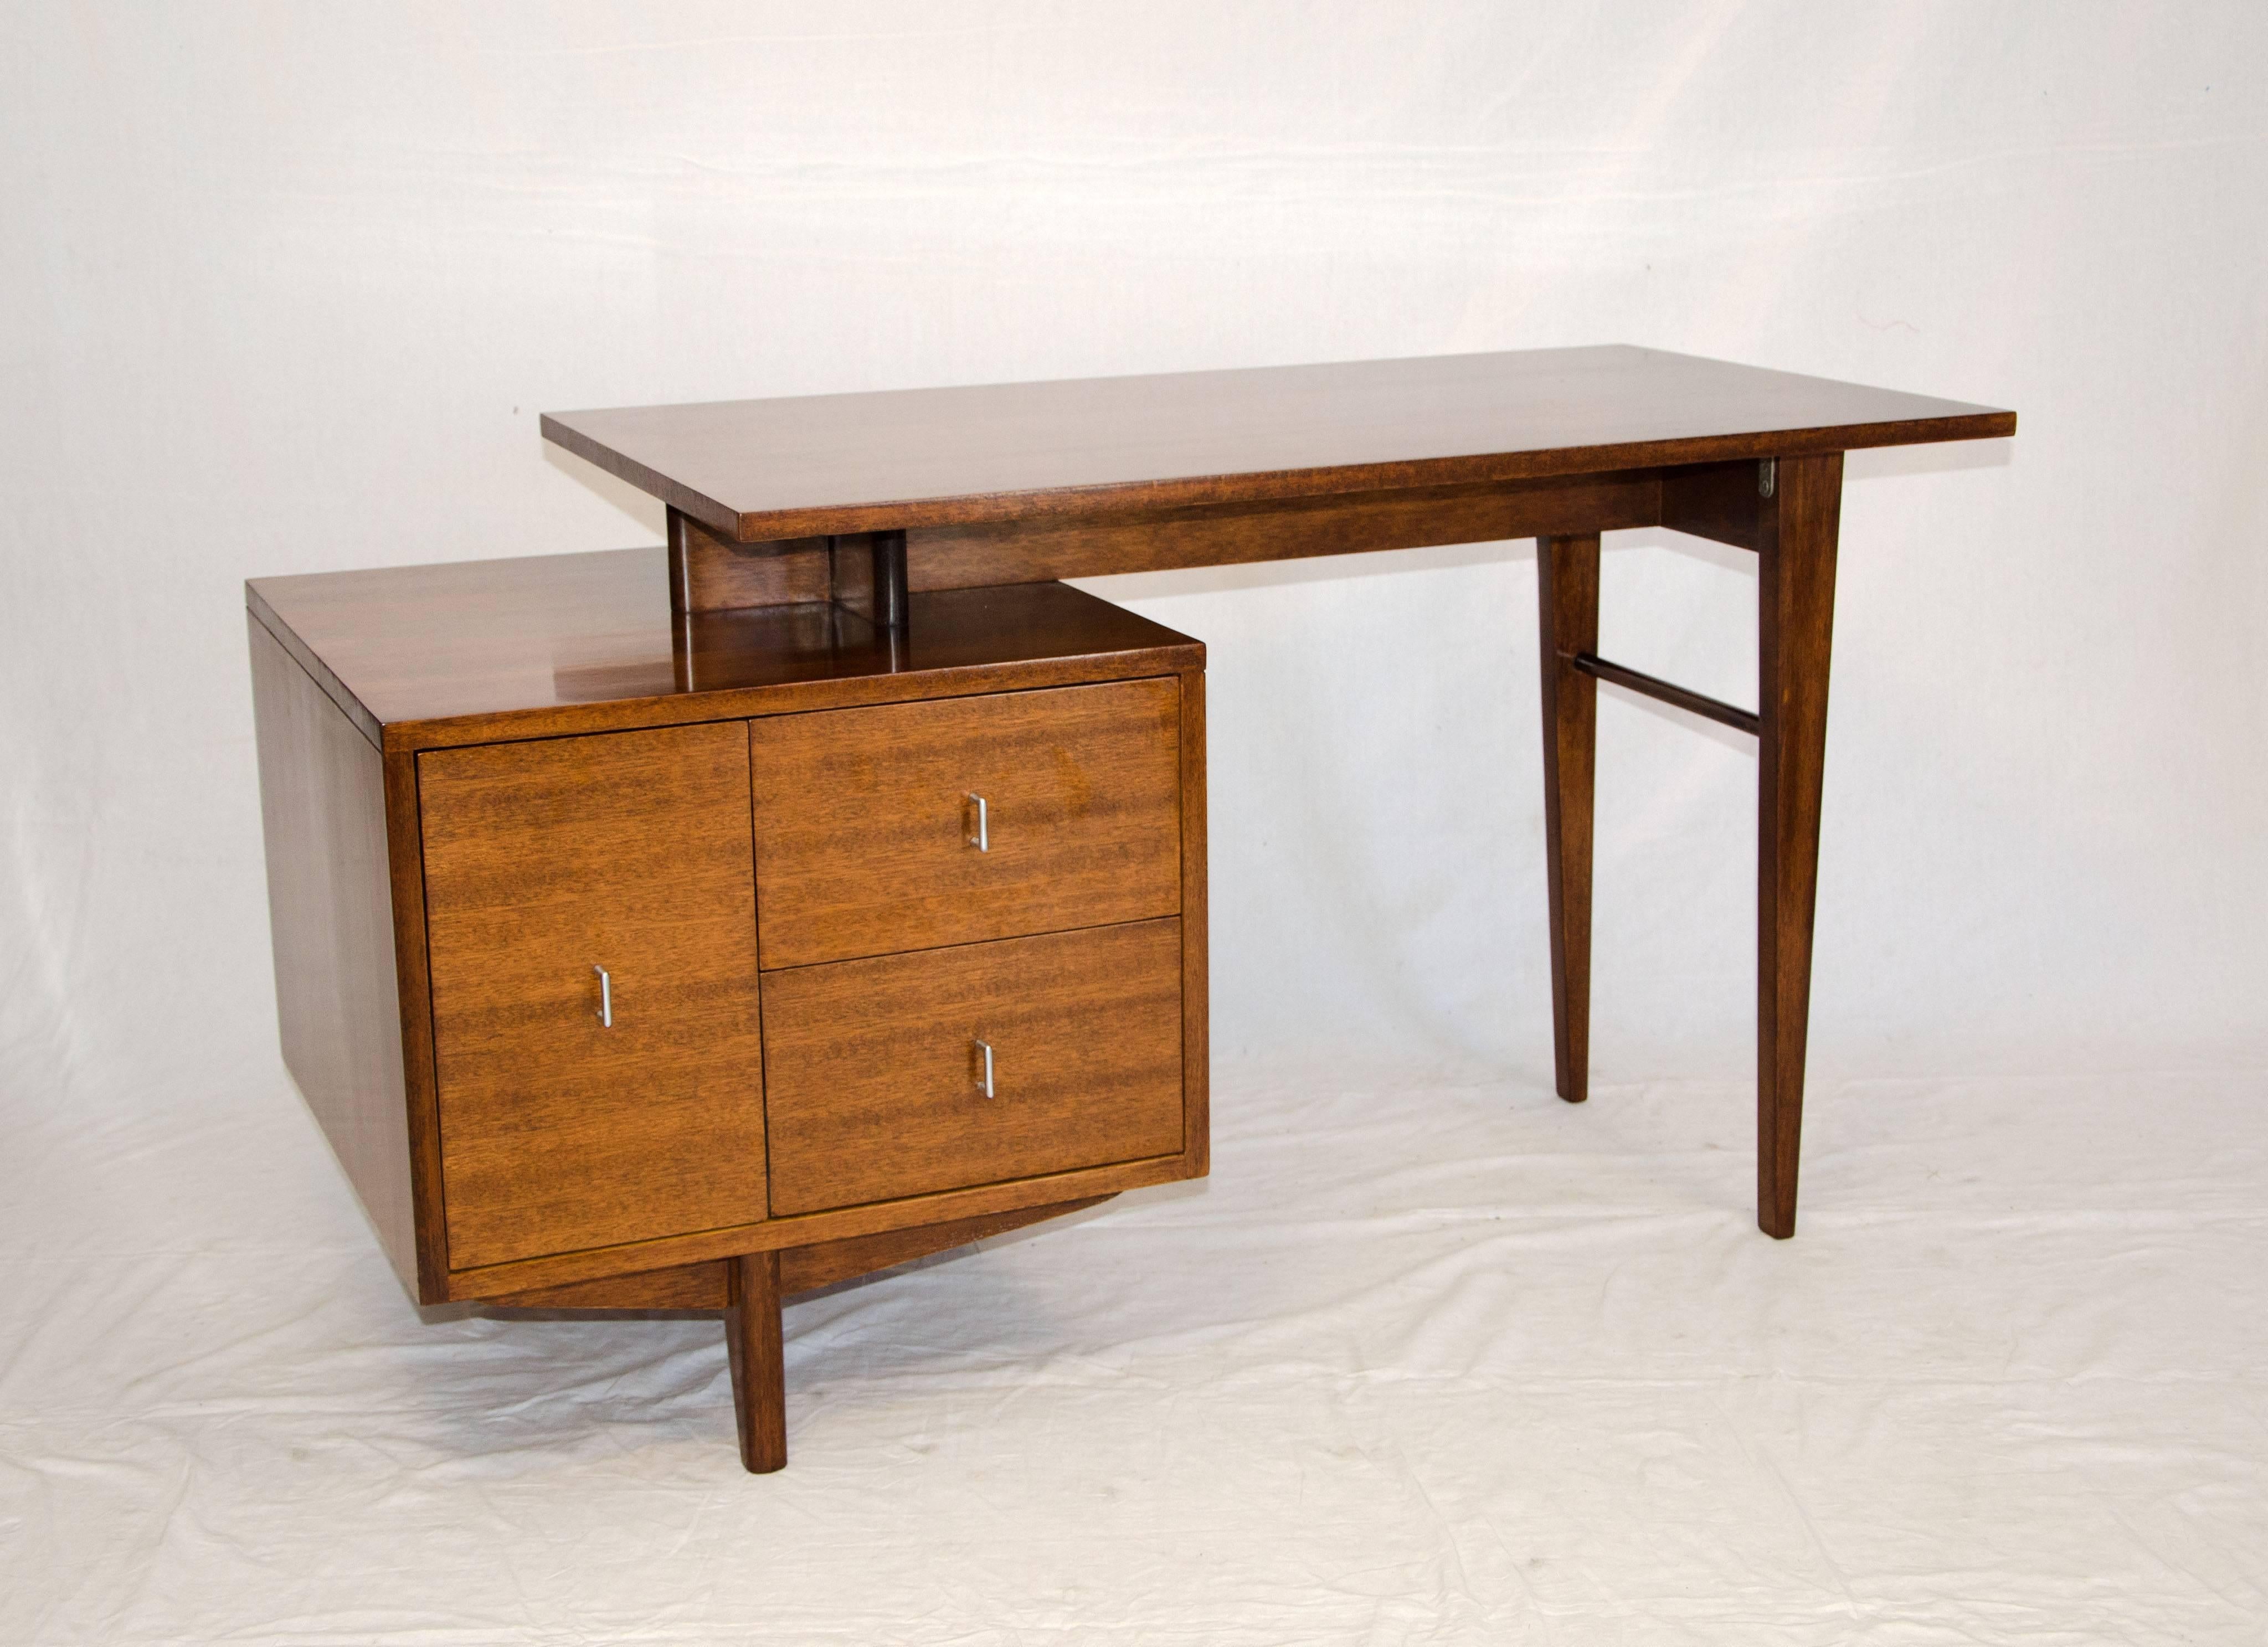 Very nice medium size ribbon mahogany desk with ample leg space. The tall drawer on the left is for filing, the interior measures 13